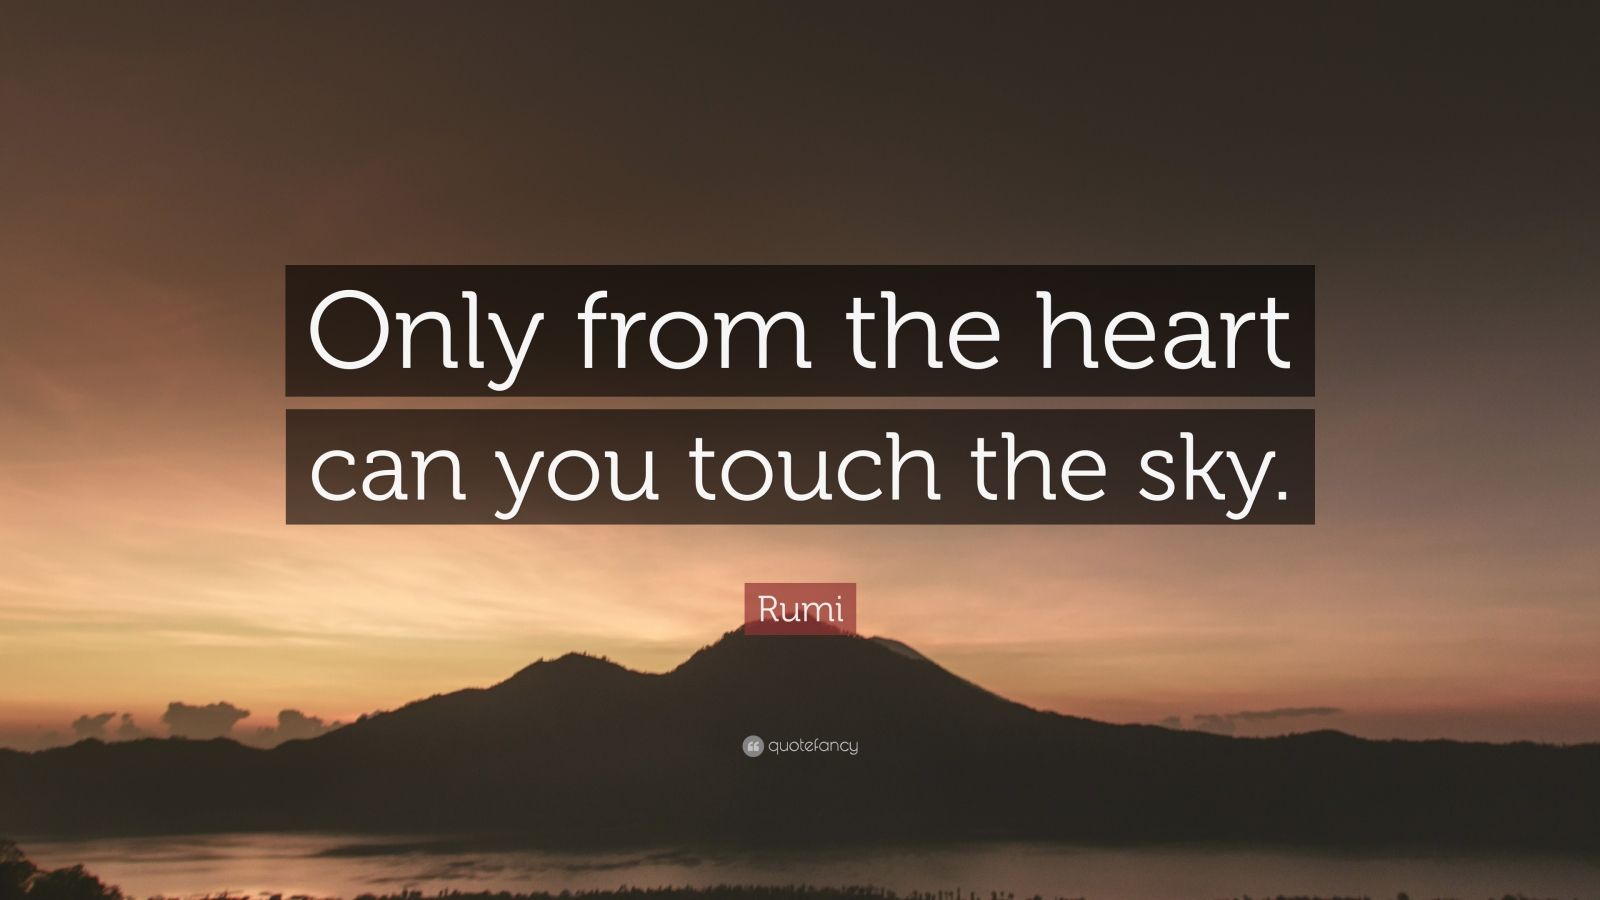 Rumi Quote “Only from the heart can you touch the sky